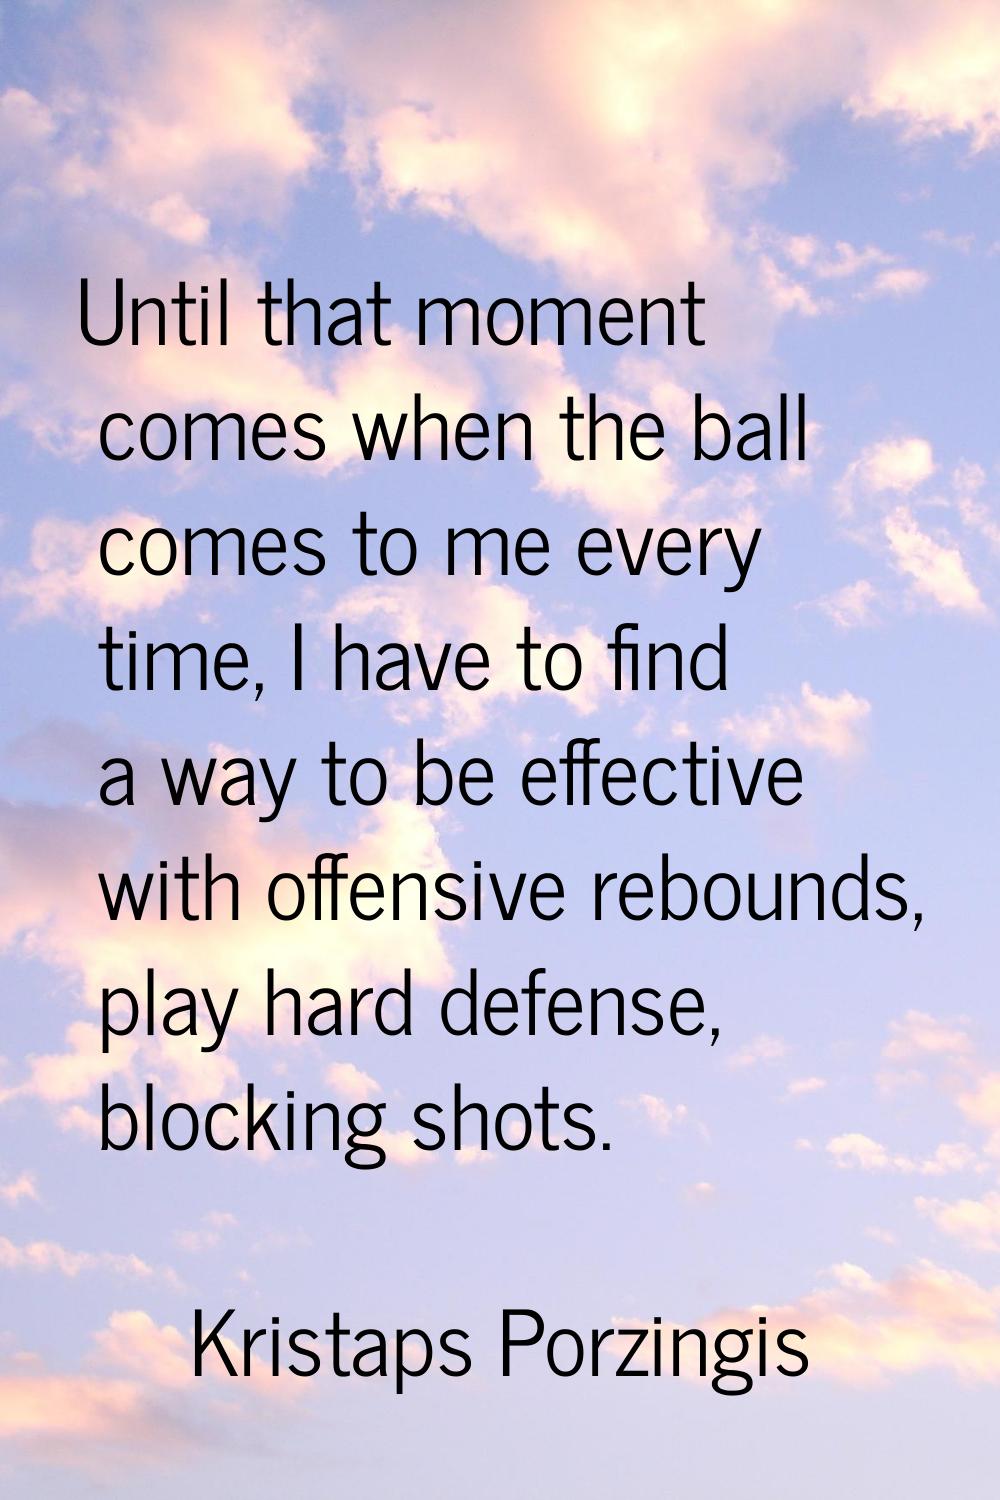 Until that moment comes when the ball comes to me every time, I have to find a way to be effective 